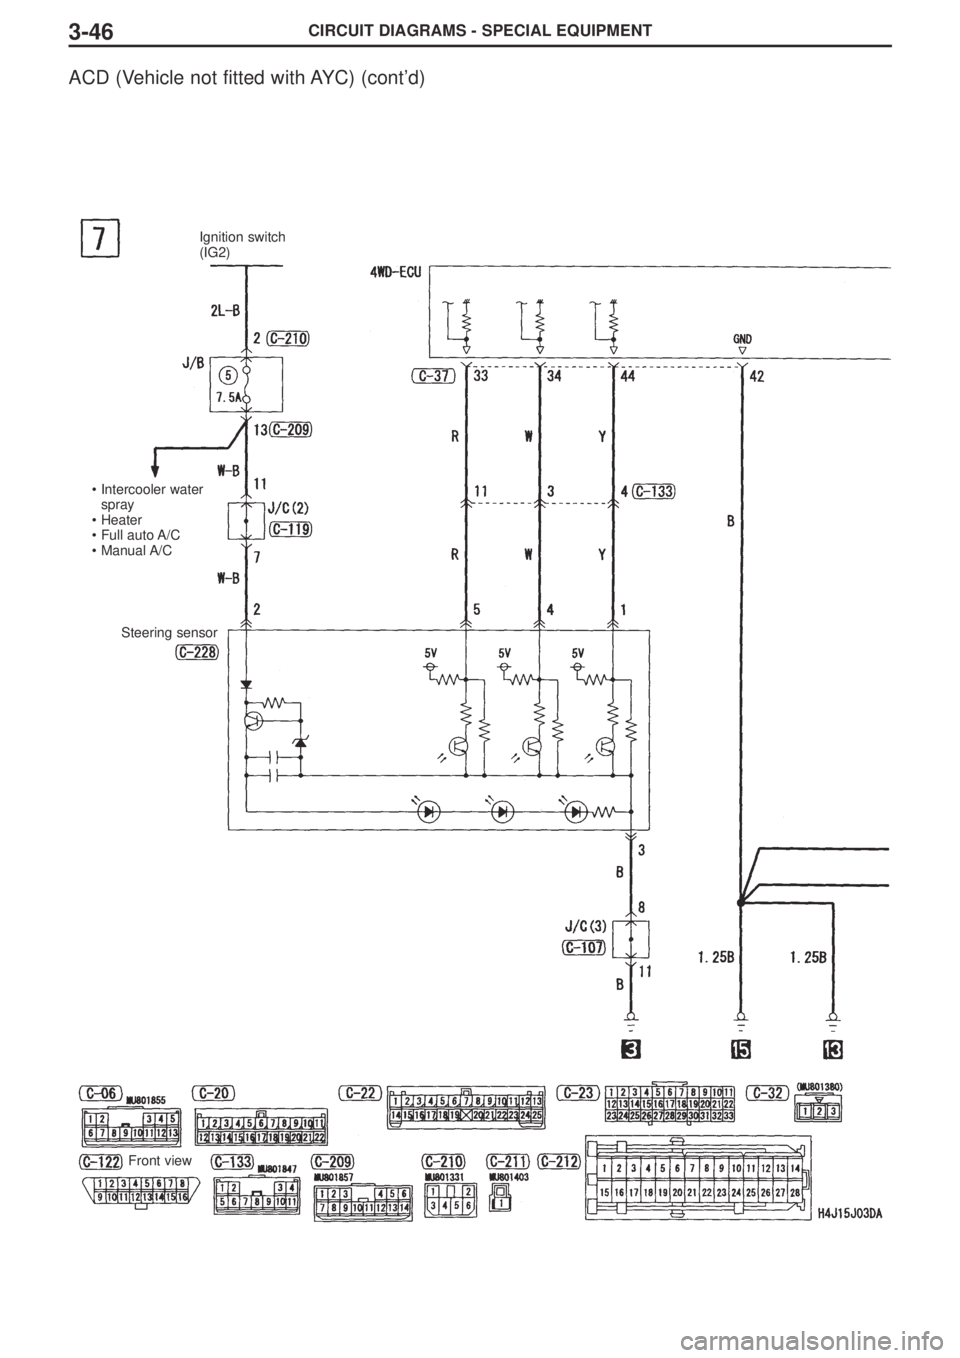 MITSUBISHI LANCER EVOLUTION VIII 2004  Workshop Manual CIRCUIT DIAGRAMS - SPECIAL EQUIPMENT3-46
ACD (Vehicle not fitted with AYC) (cont’d)
Ignition switch
(IG2)
•Intercooler water 
spray
•Heater
•Full auto A/C
•Manual A/C
Steering sensor
Front v